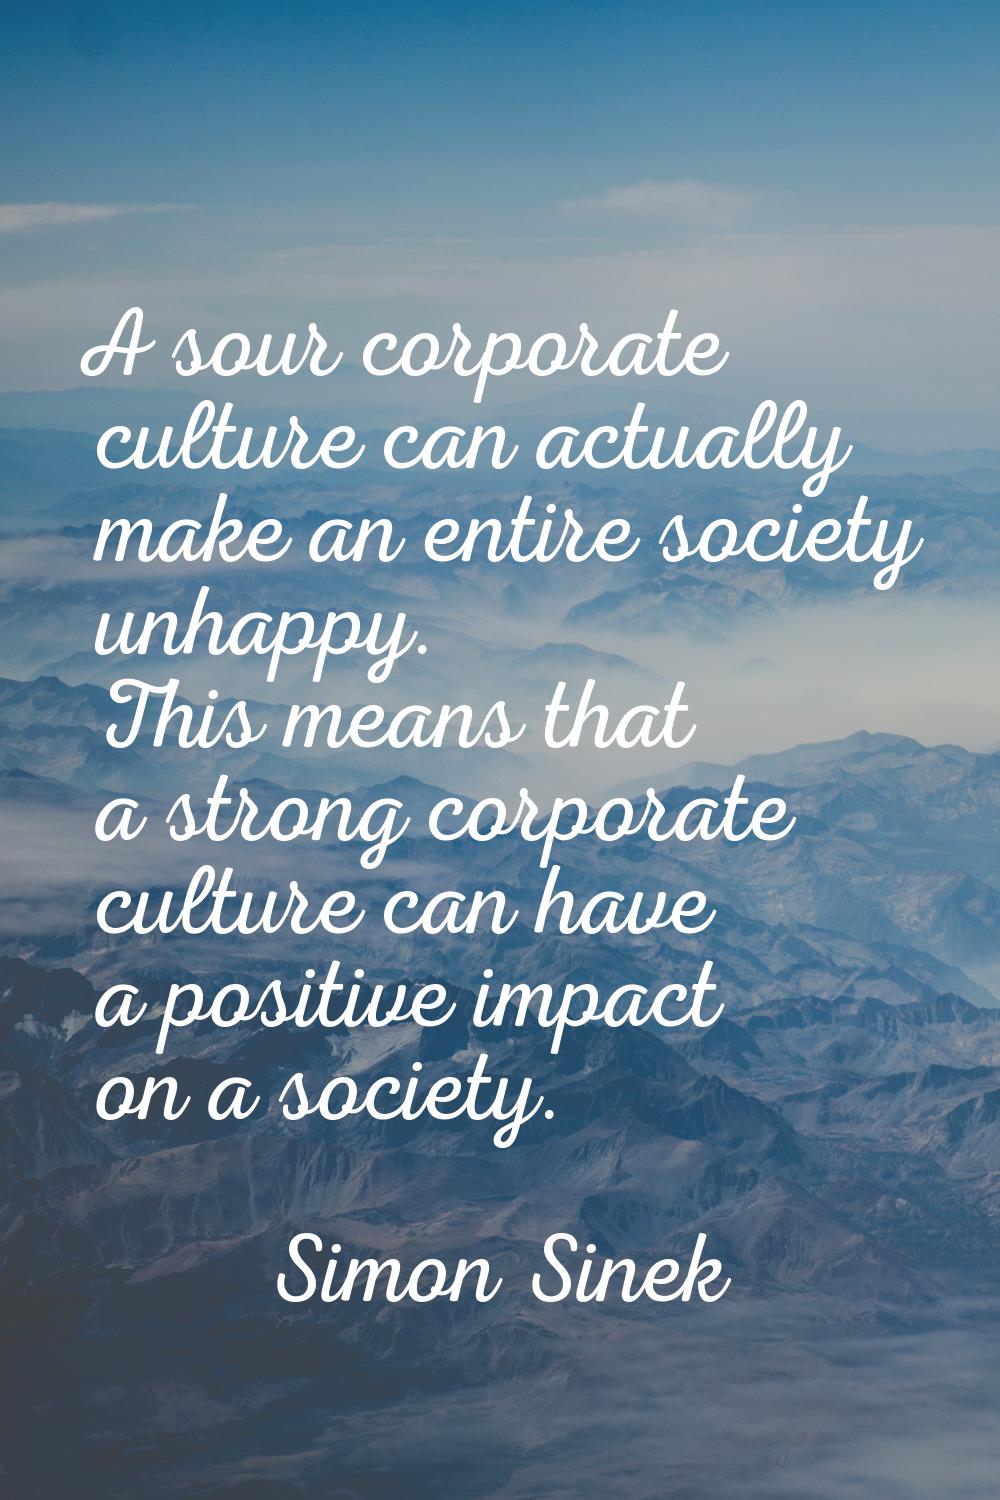 A sour corporate culture can actually make an entire society unhappy. This means that a strong corp